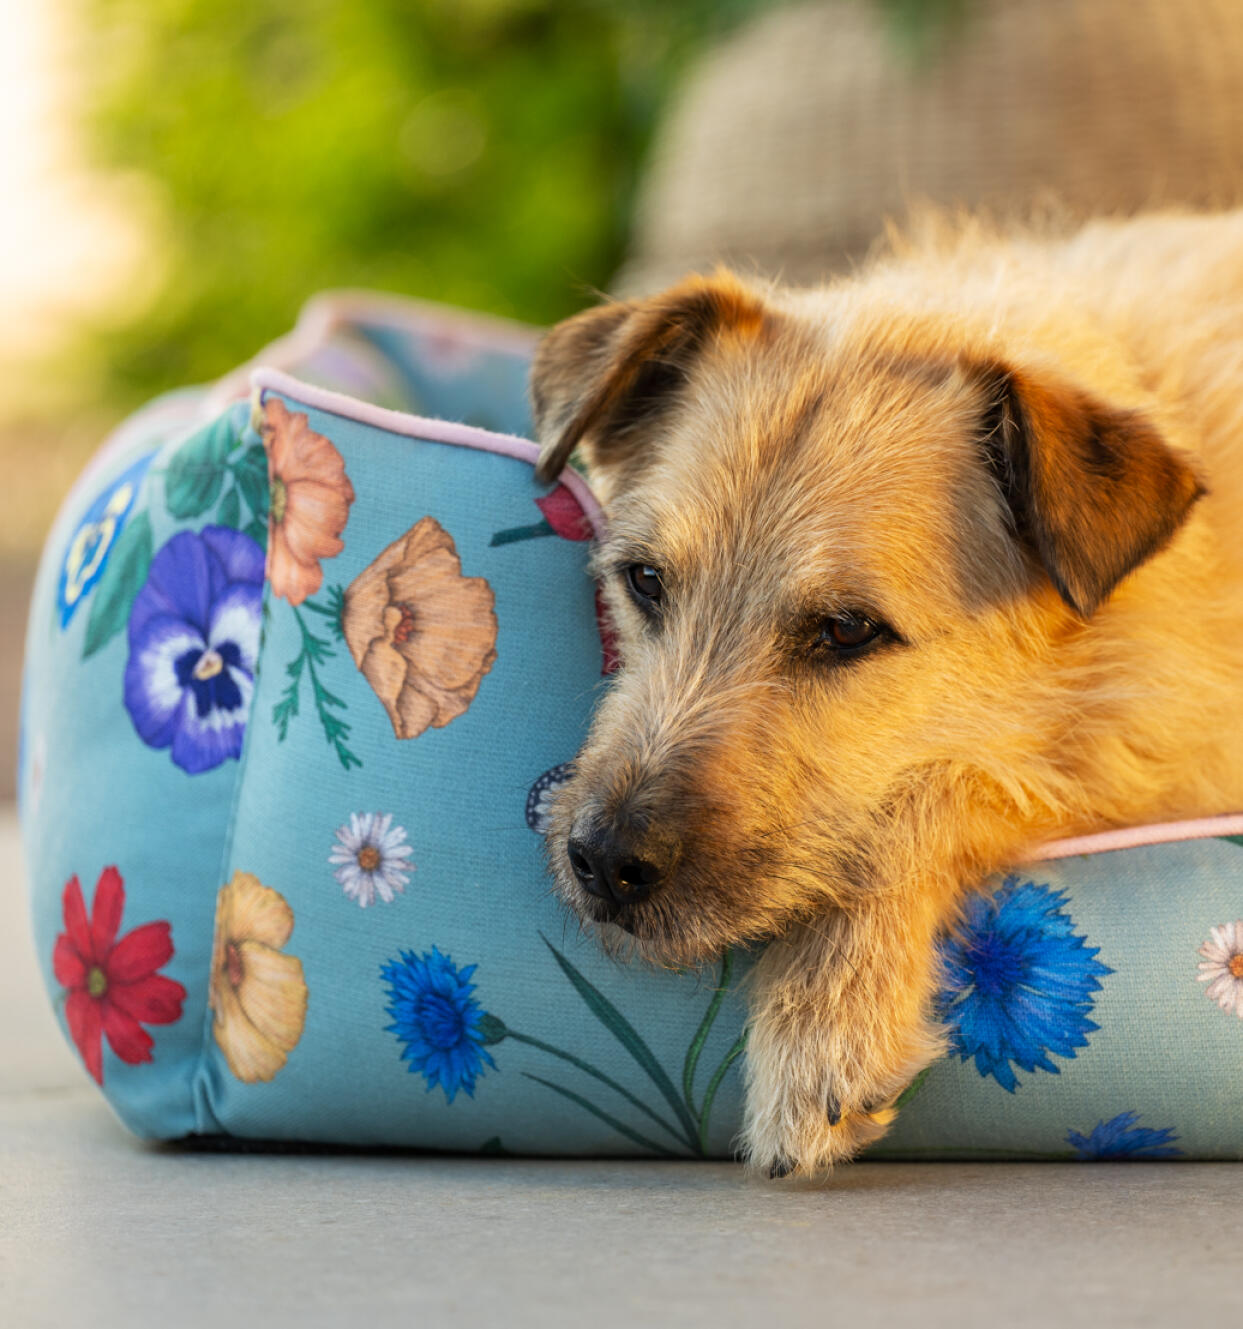 Dog relaxing on sustainable dog bed